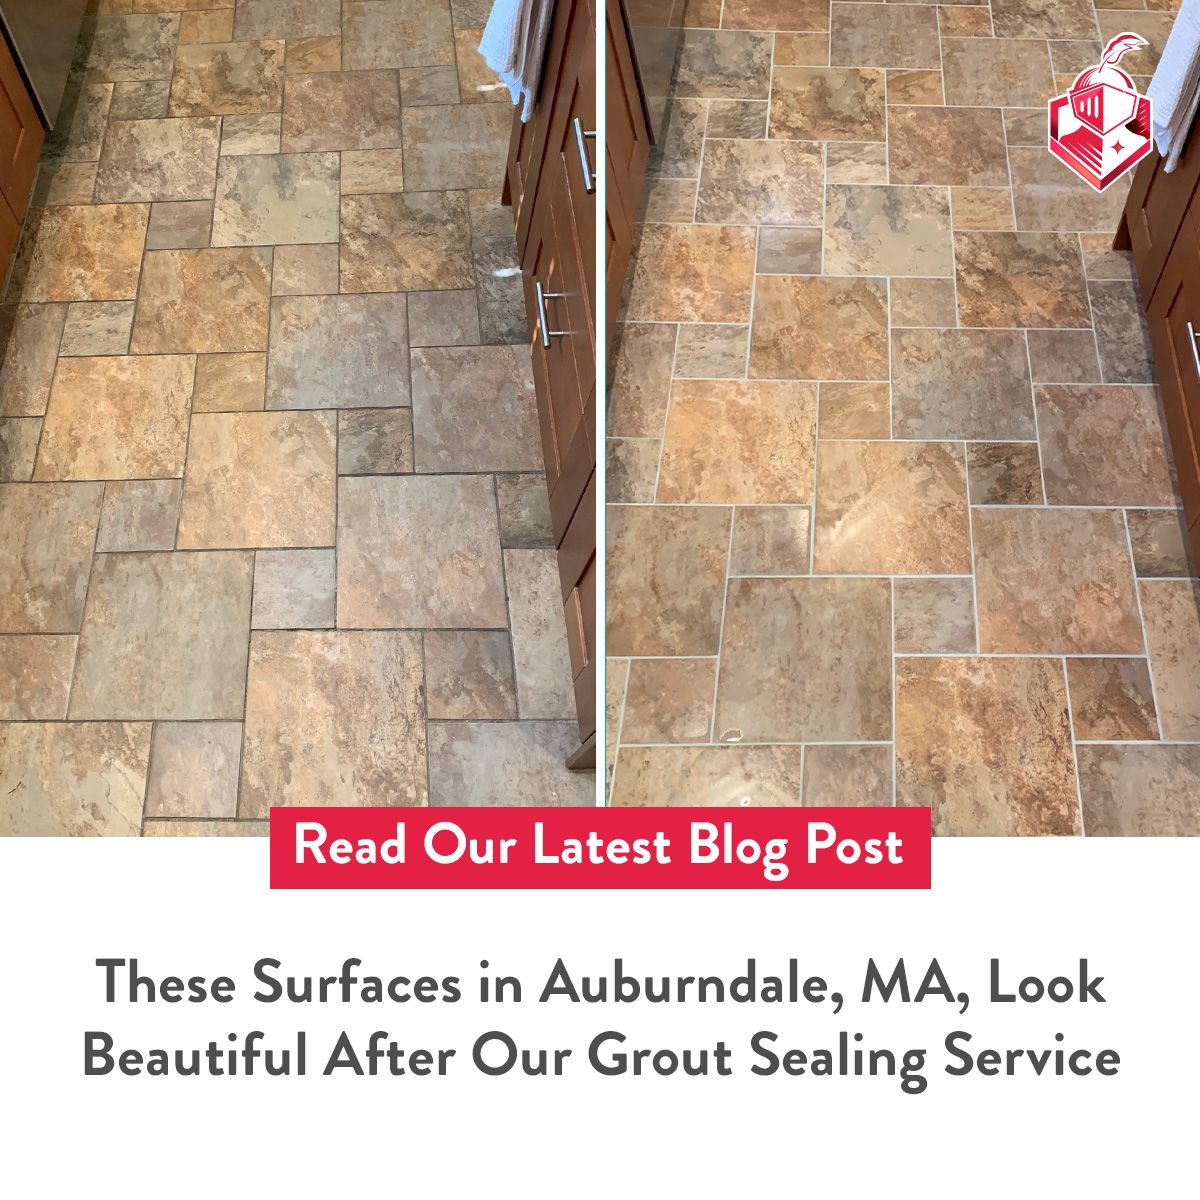 These Surfaces in Auburndale, MA, Look Beautiful After Our Grout Sealing Service